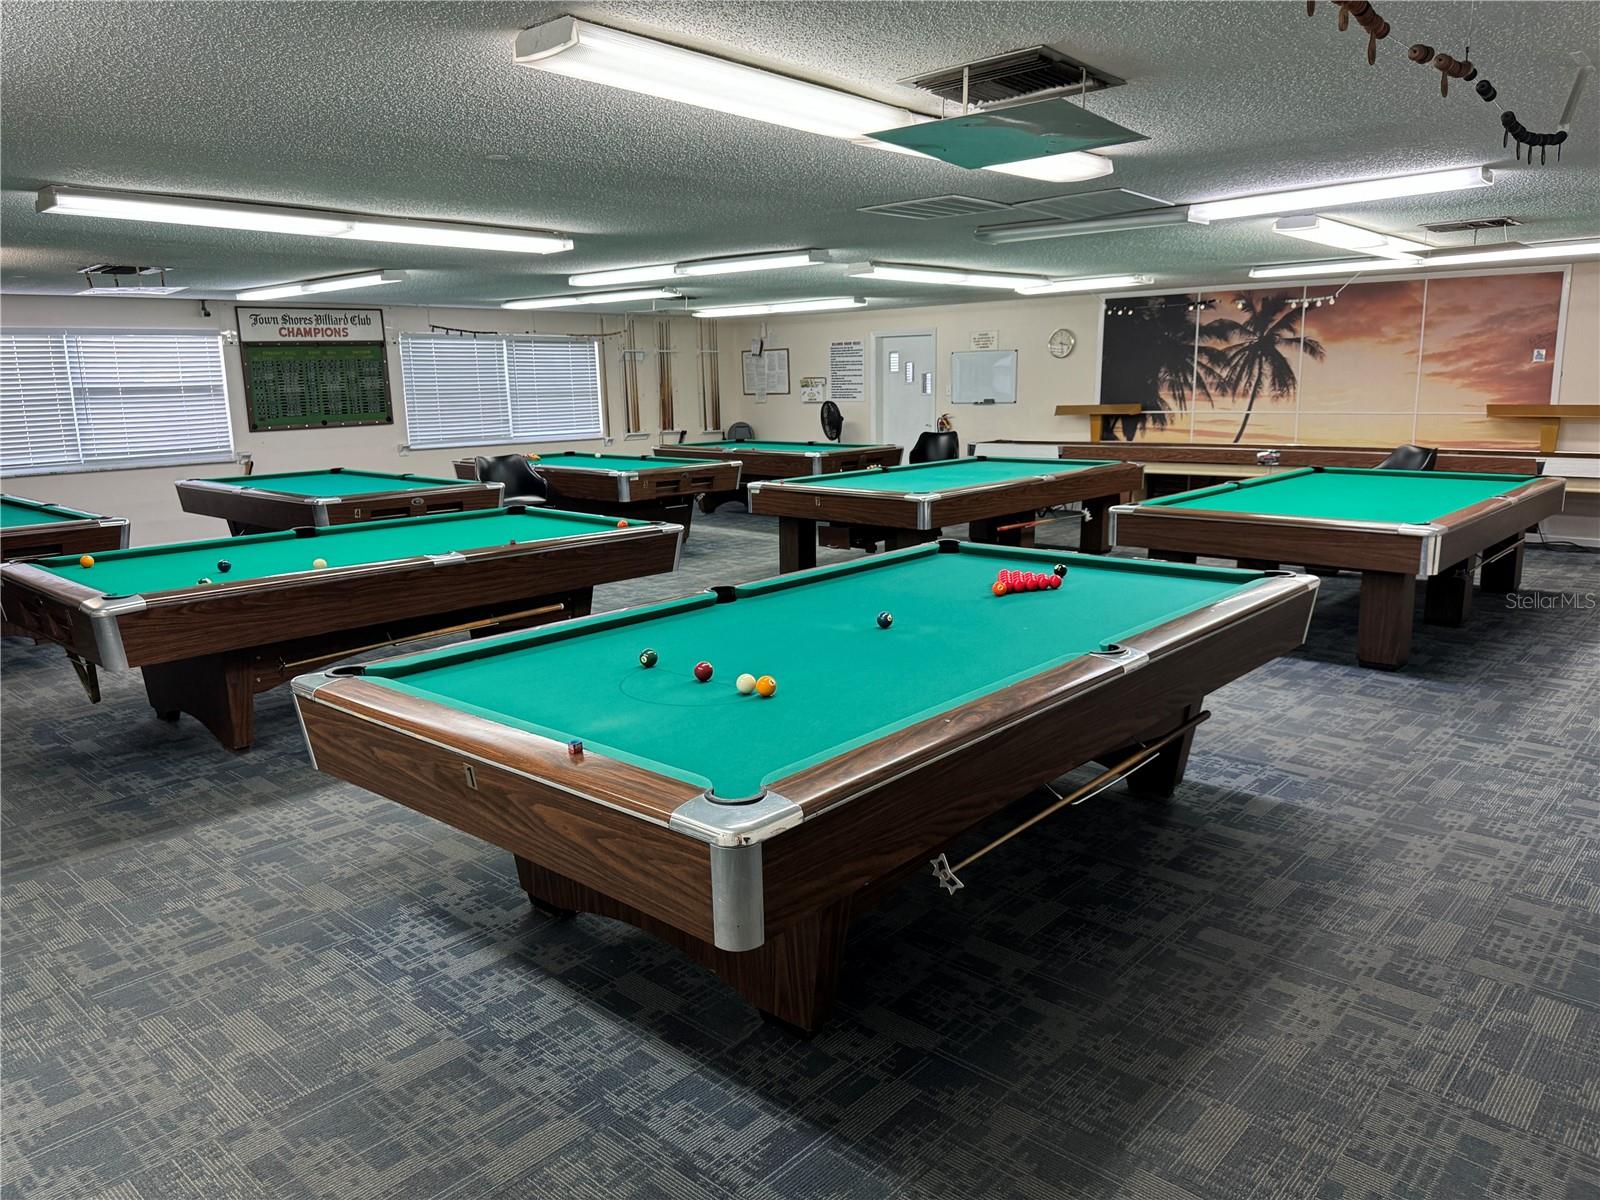 Eight pool tables to choose from for pool or snooker